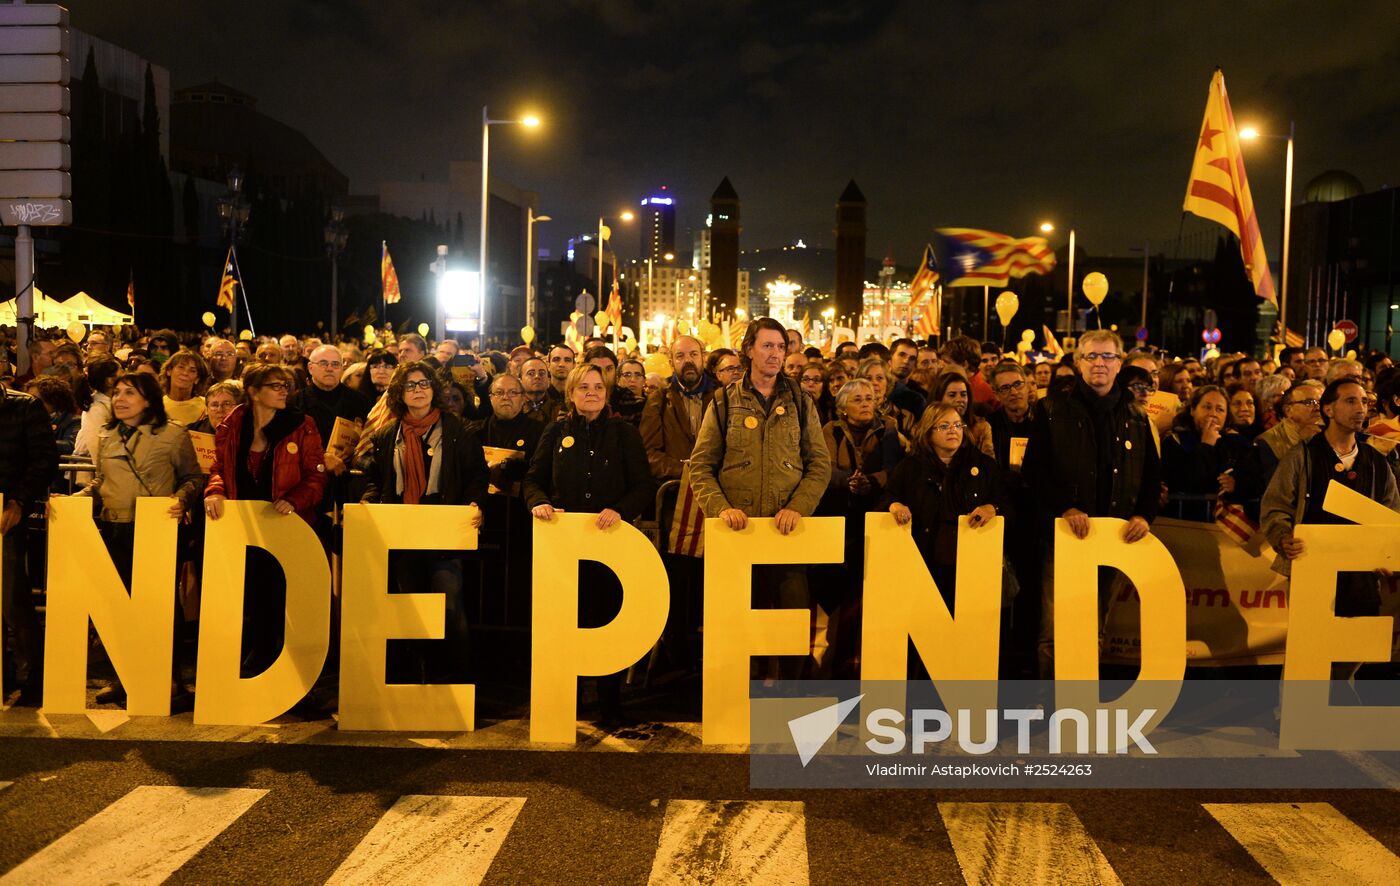 Rally in support of independent Catalonia in Barcelona